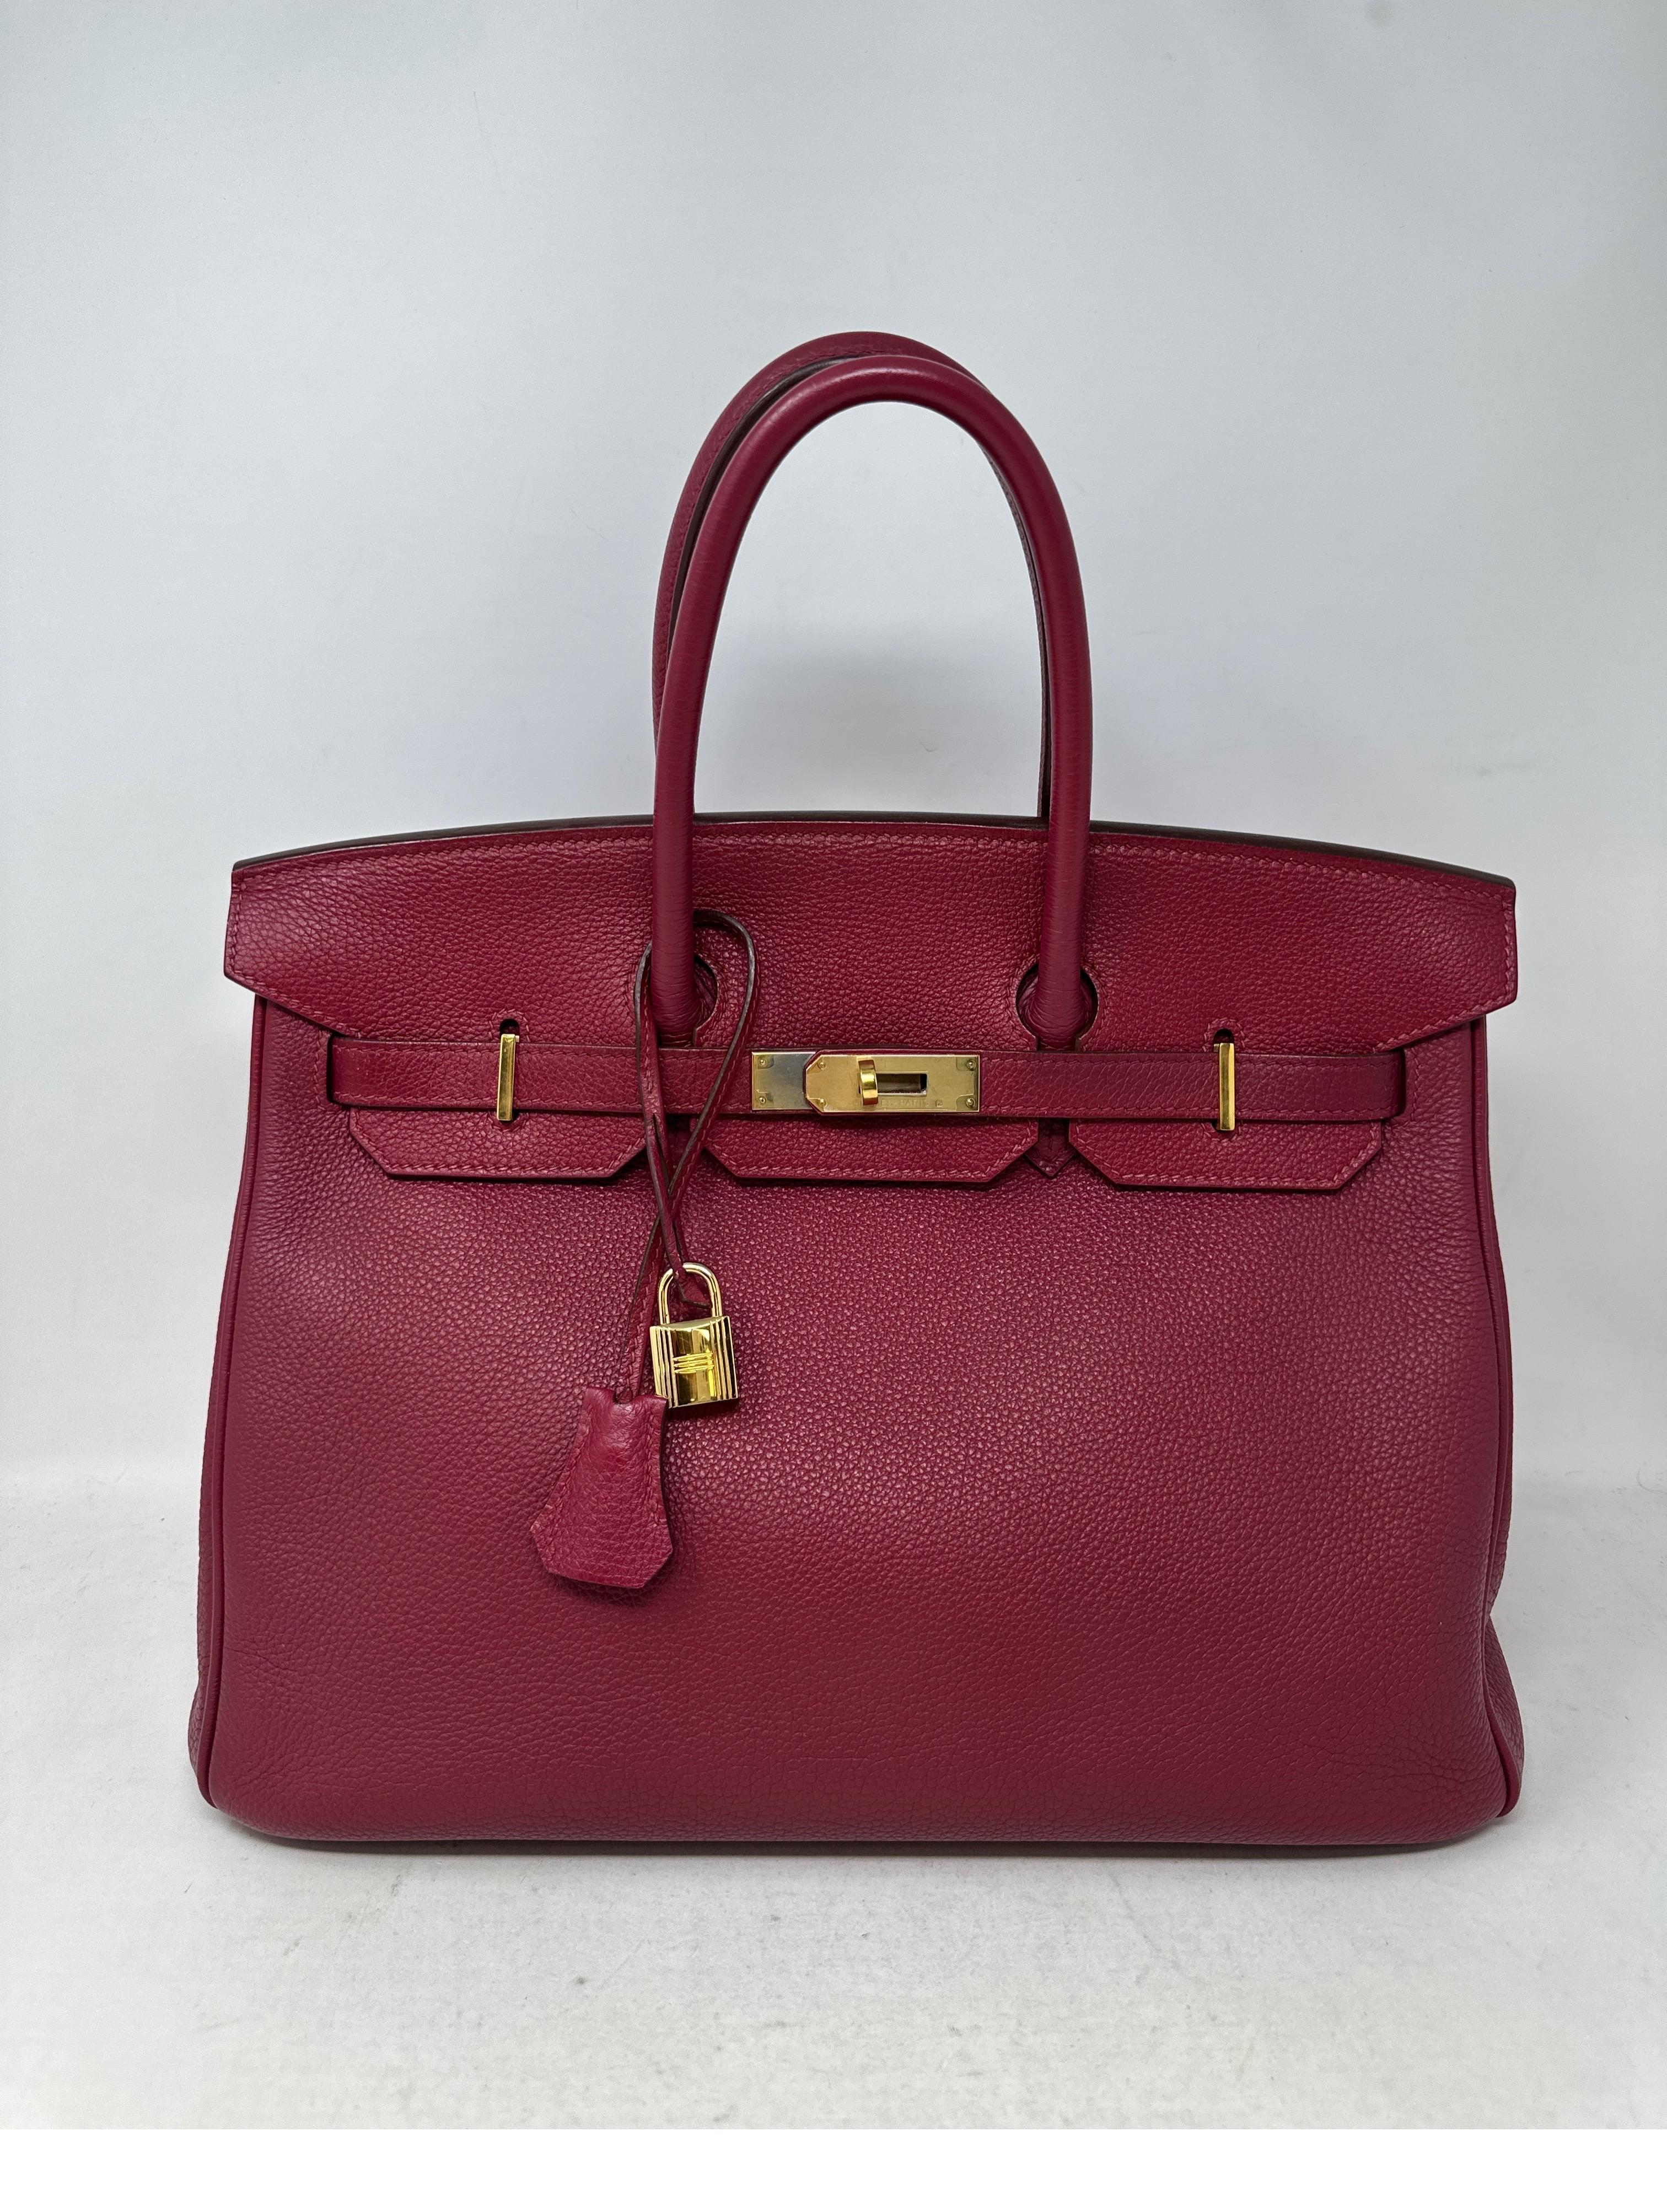 Hermes Rubis Birkin 35 Bag. Gold hardware. Beautiful burgundy and cranberry  red color Birkin. Excellent condition. Interior clean. Includes clochette, lock, keys, and dust bag. Guaranteed authentic. 